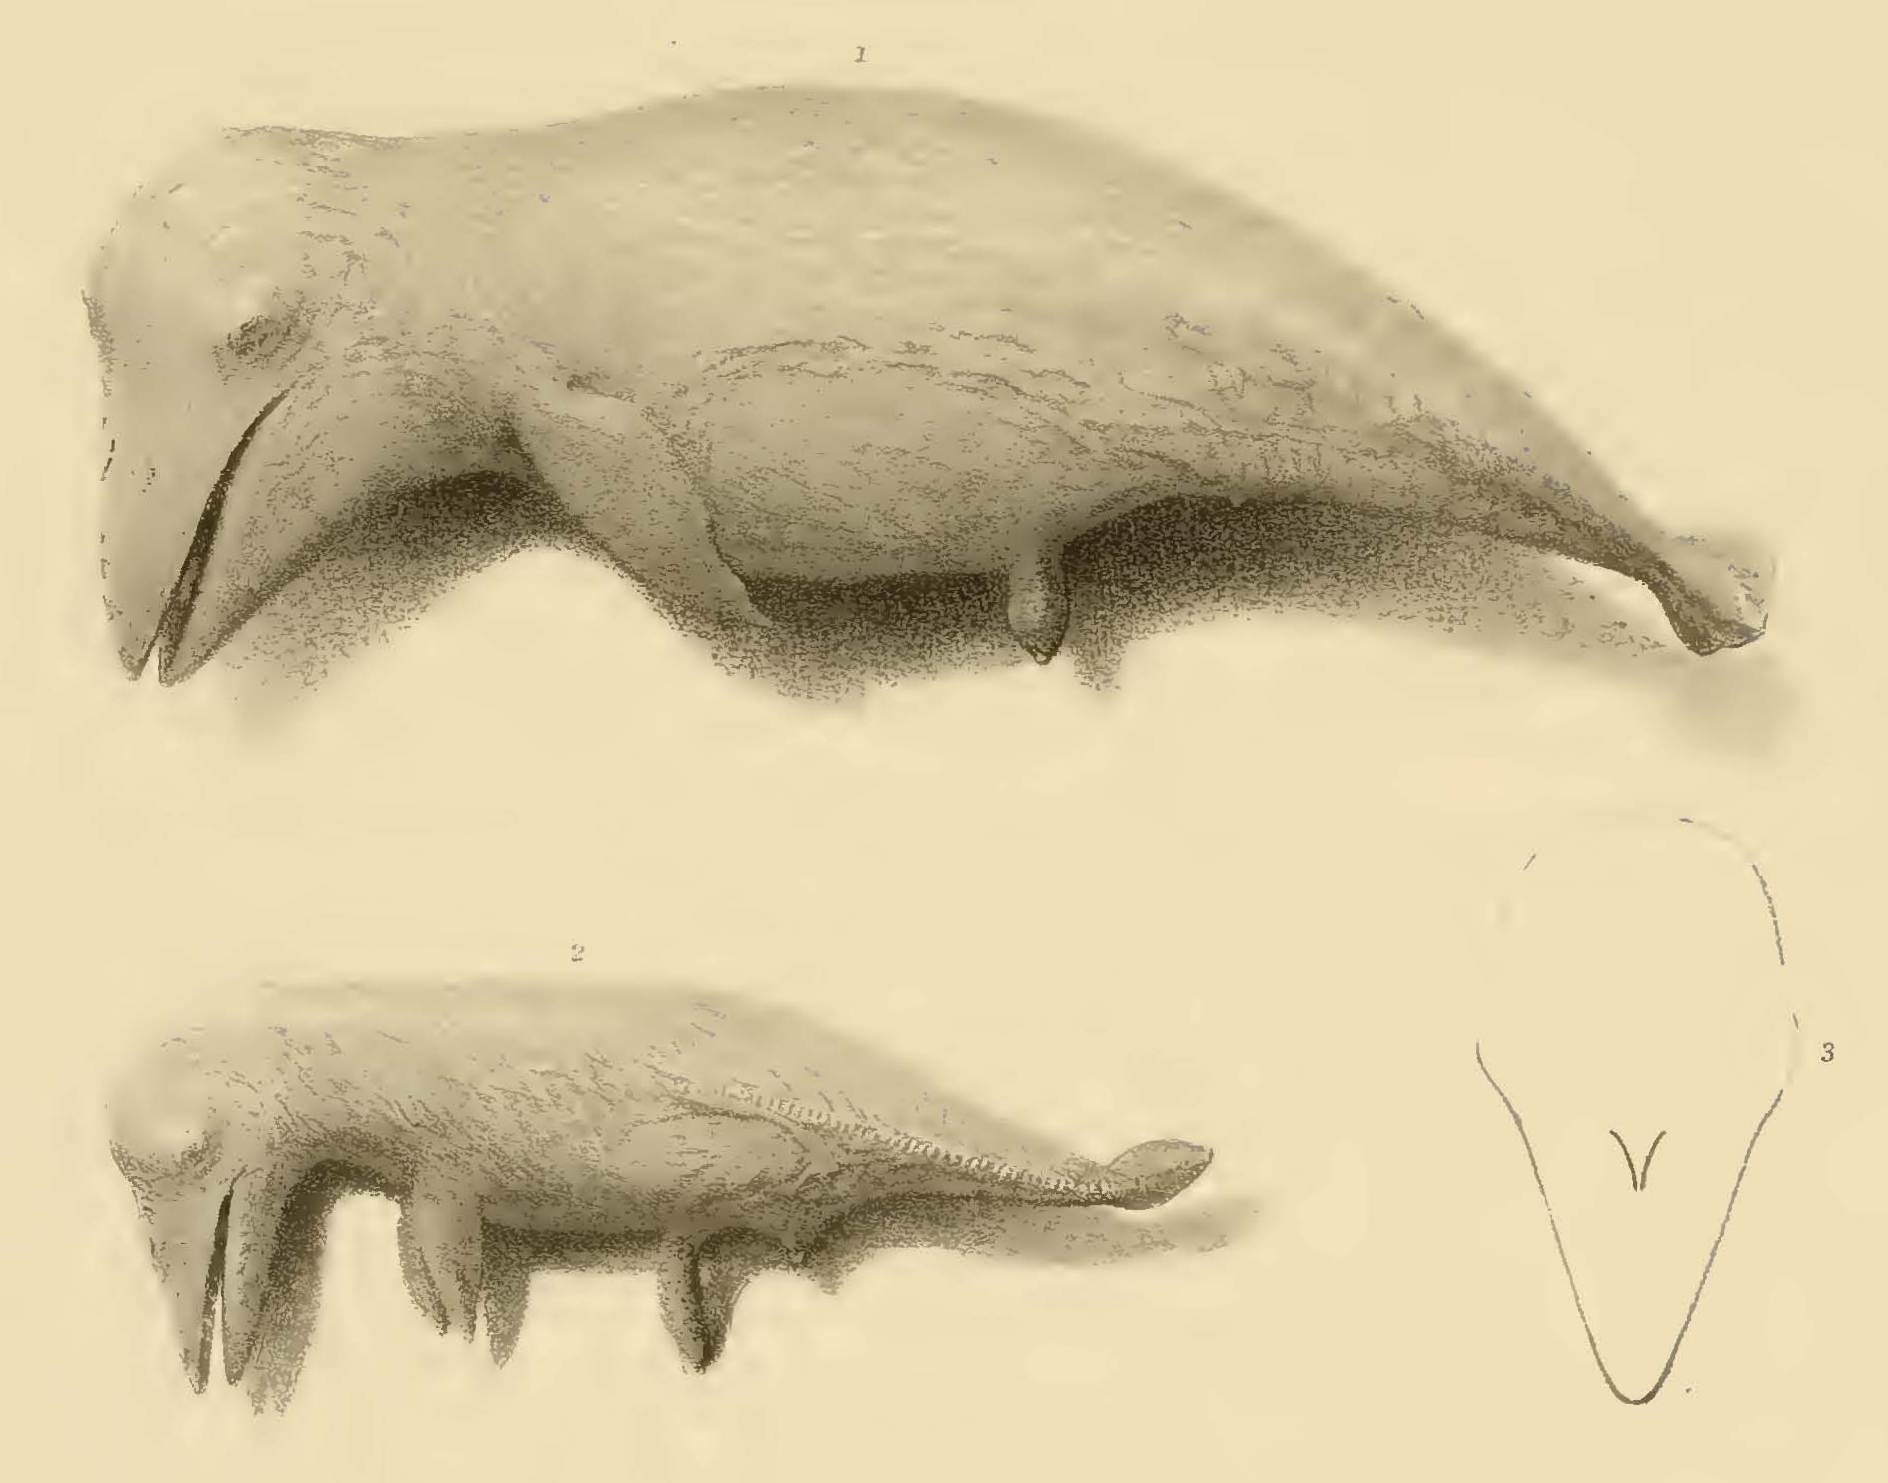 Scammon - Plate III: Fig. 1-2 Embryos of a California Gray Whale. Fig. 3. Outline of Head Showing Spouthole.